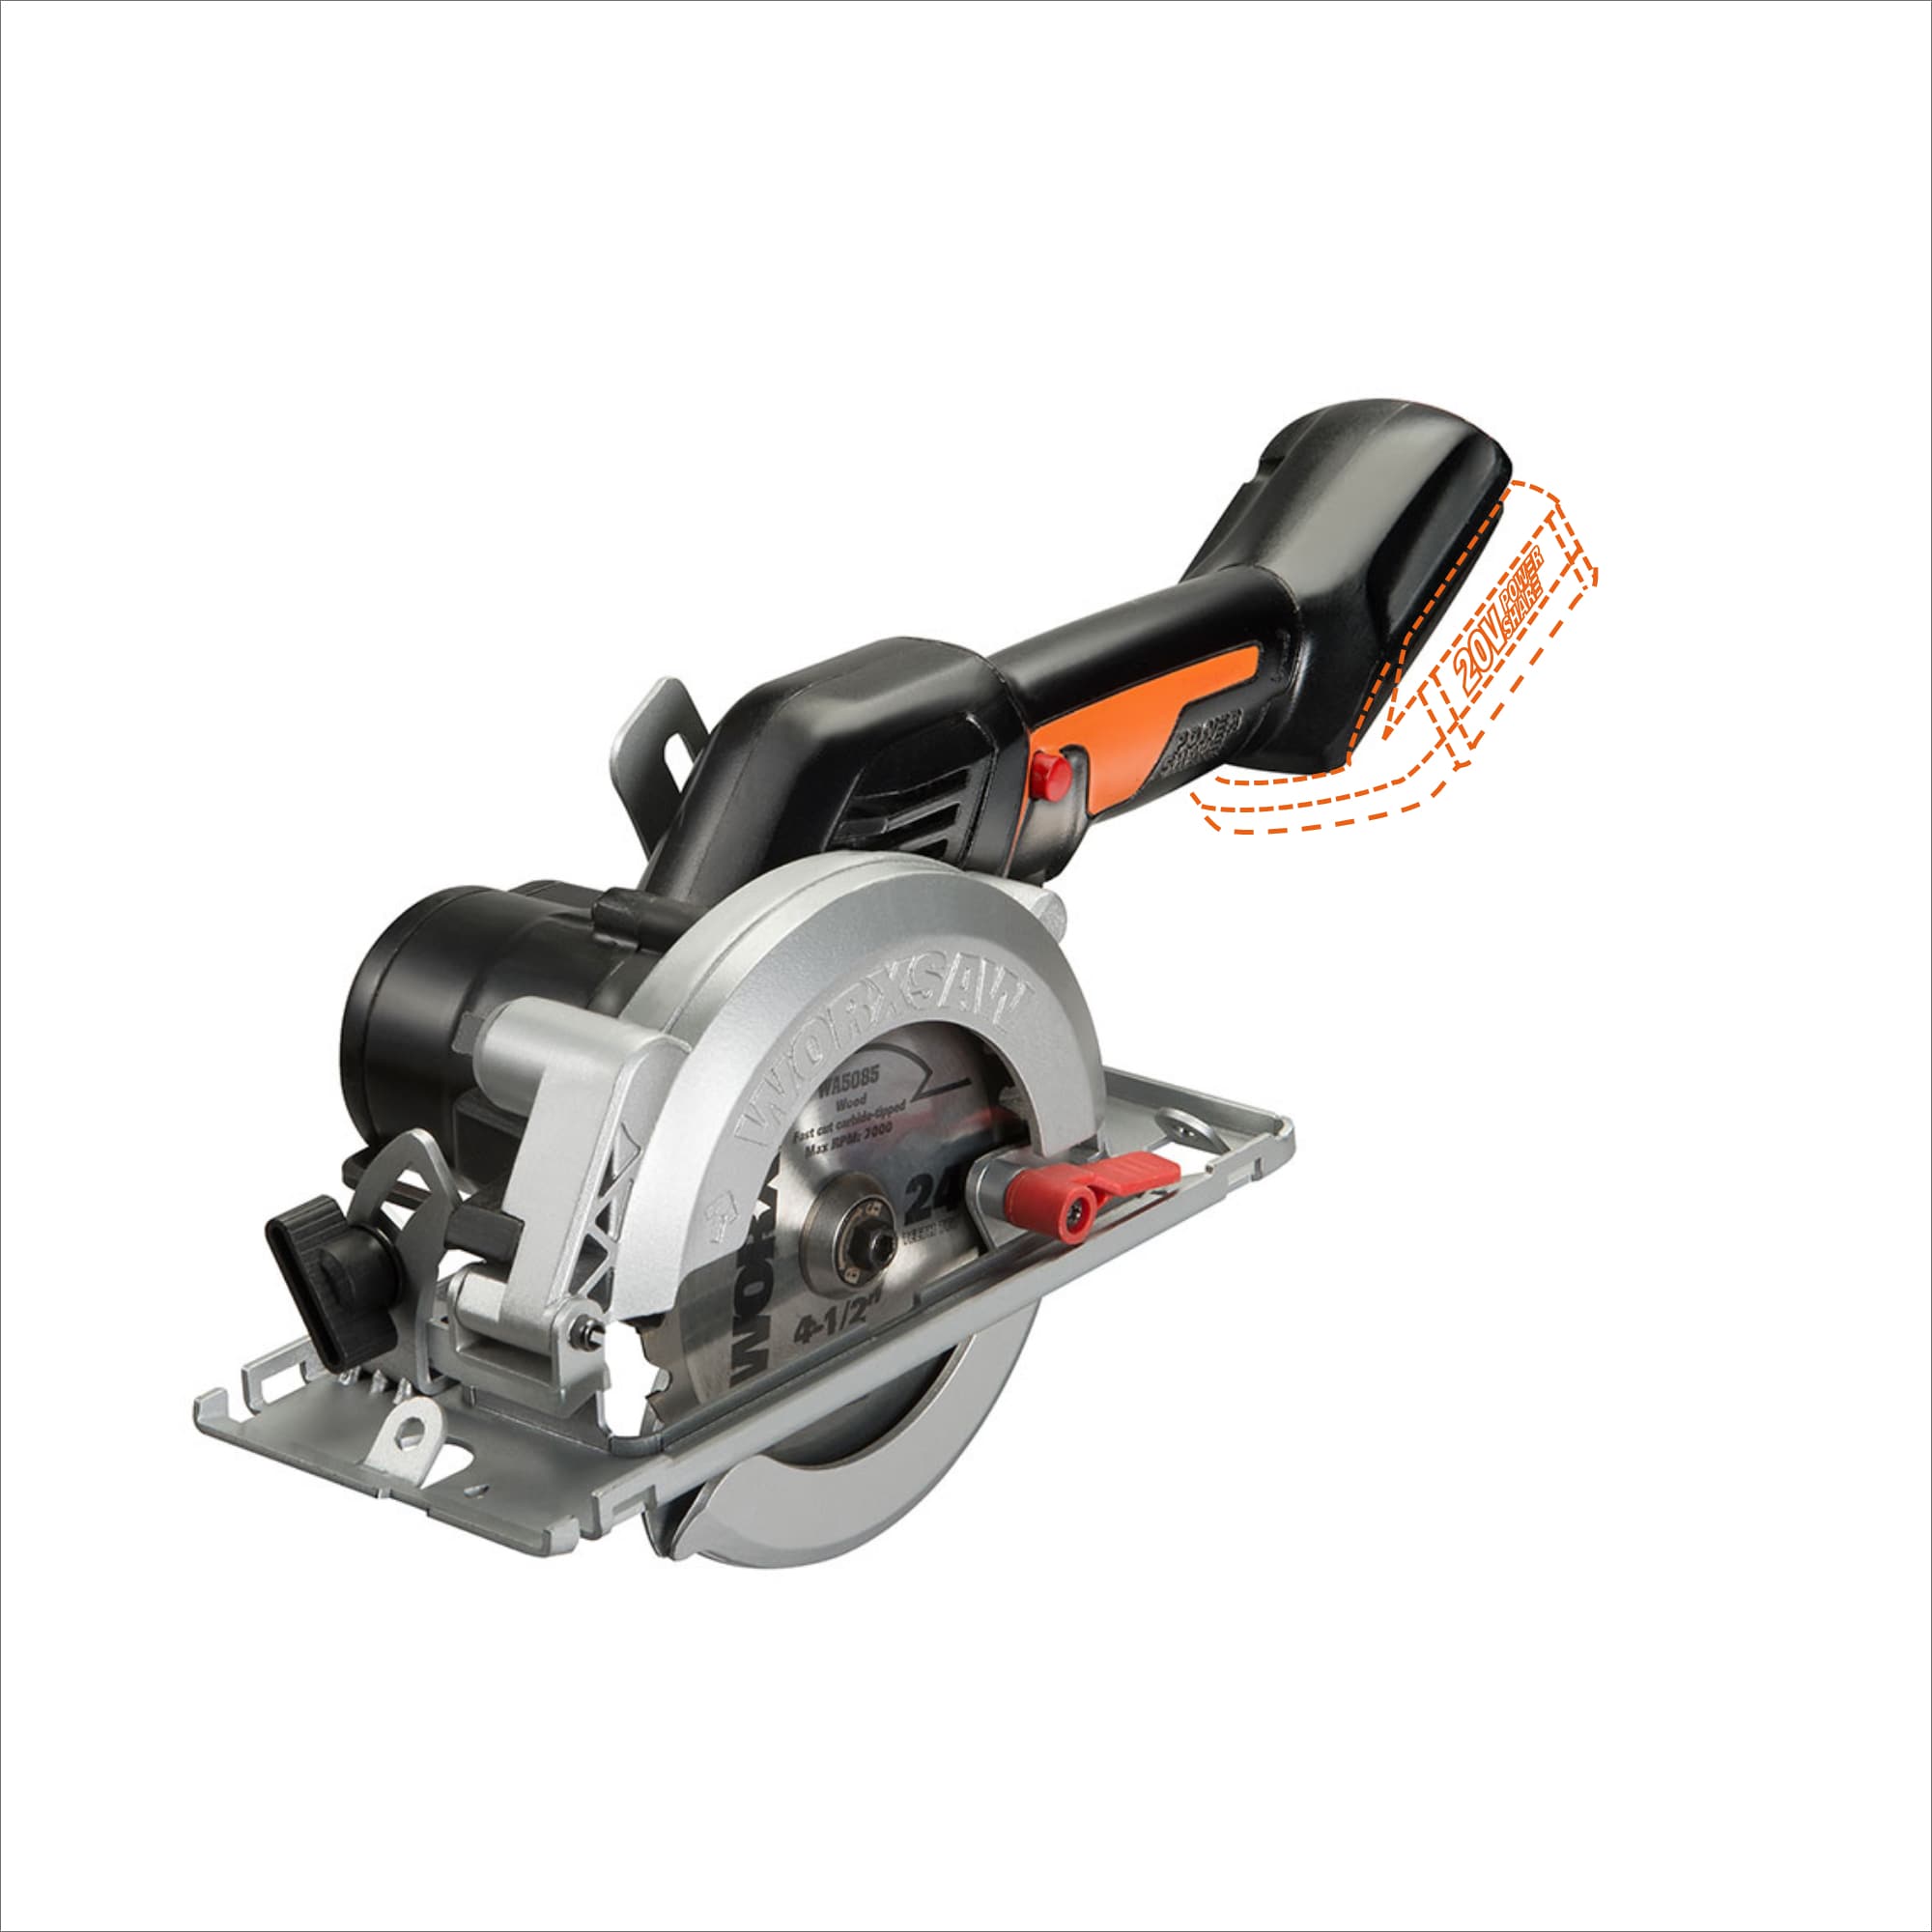 WORX Nitro Power Share 20-volt Max 4-1/2-in Cordless Compact